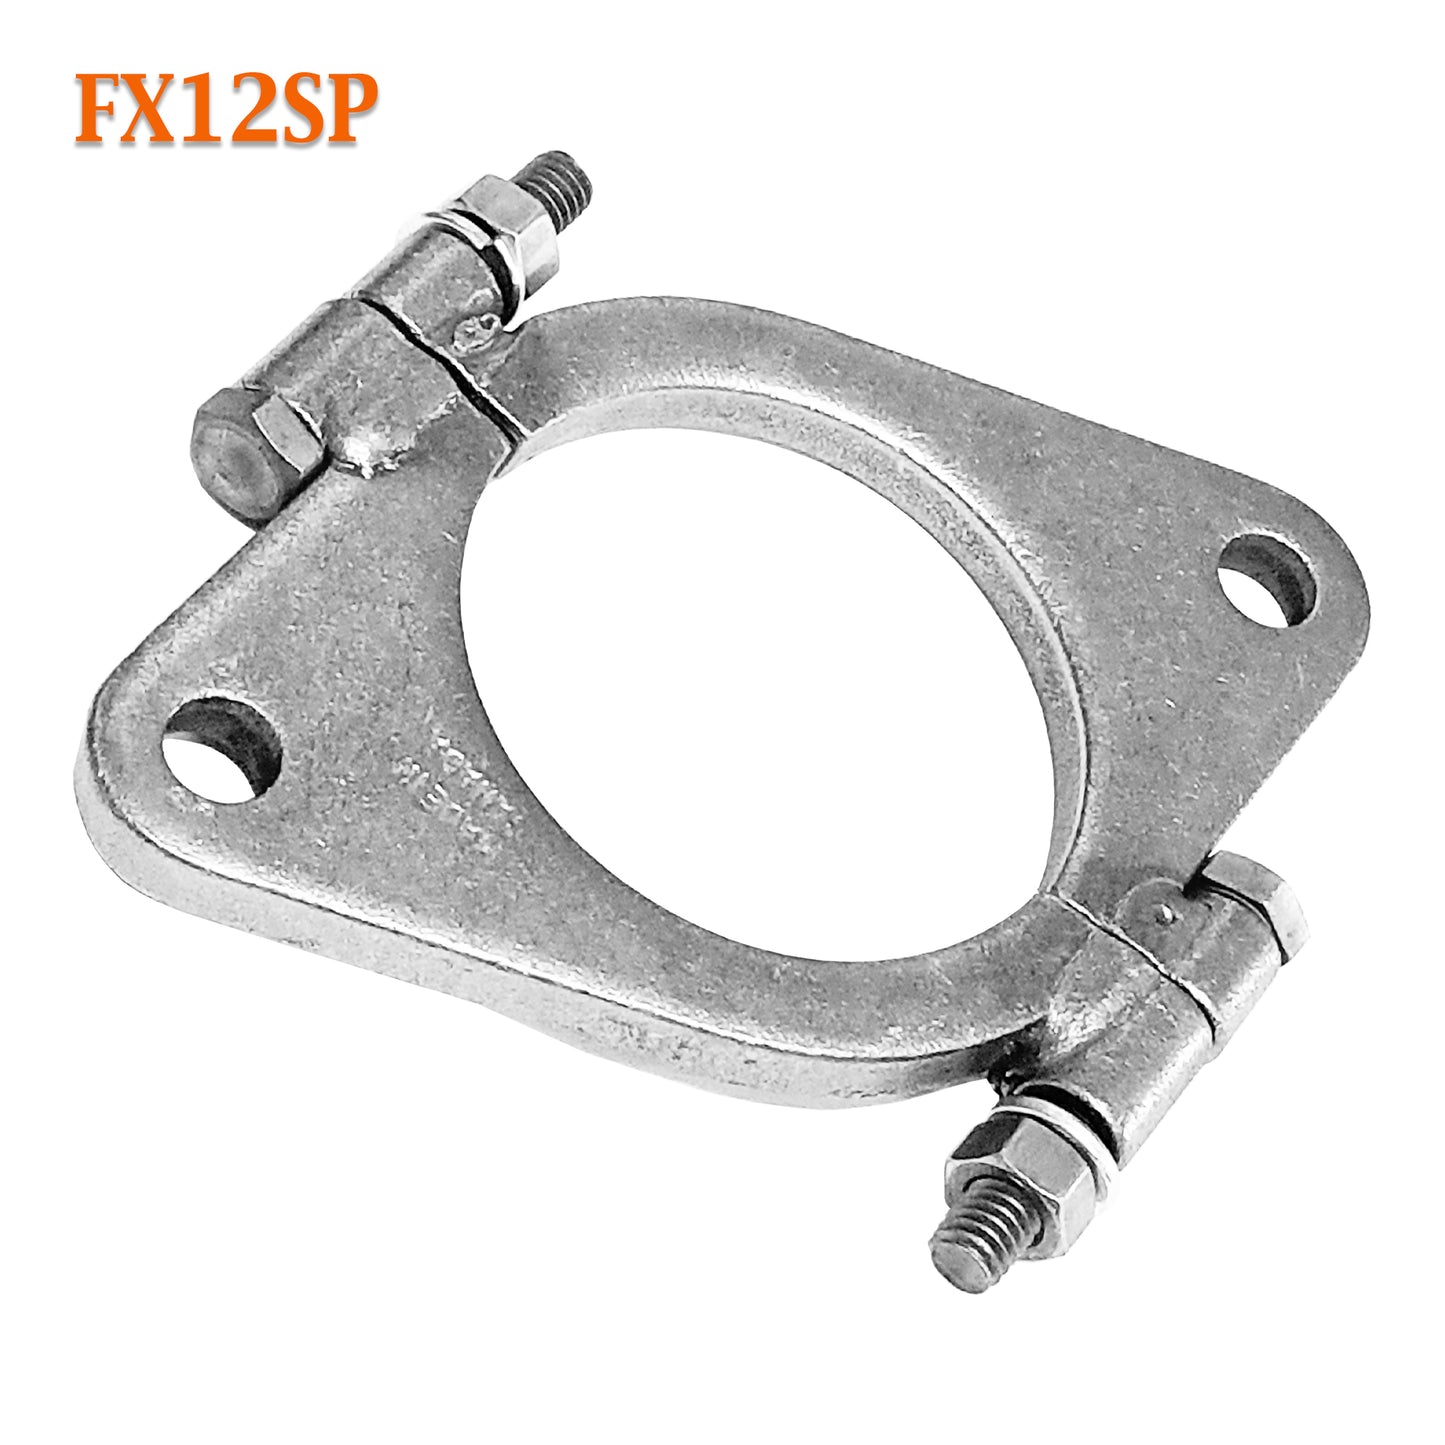 FX12SP 2 5/8" ID Flat Oval Two Bolt Split Exhaust Flange 2 1/2" 2.5" - 2.625" Pipe